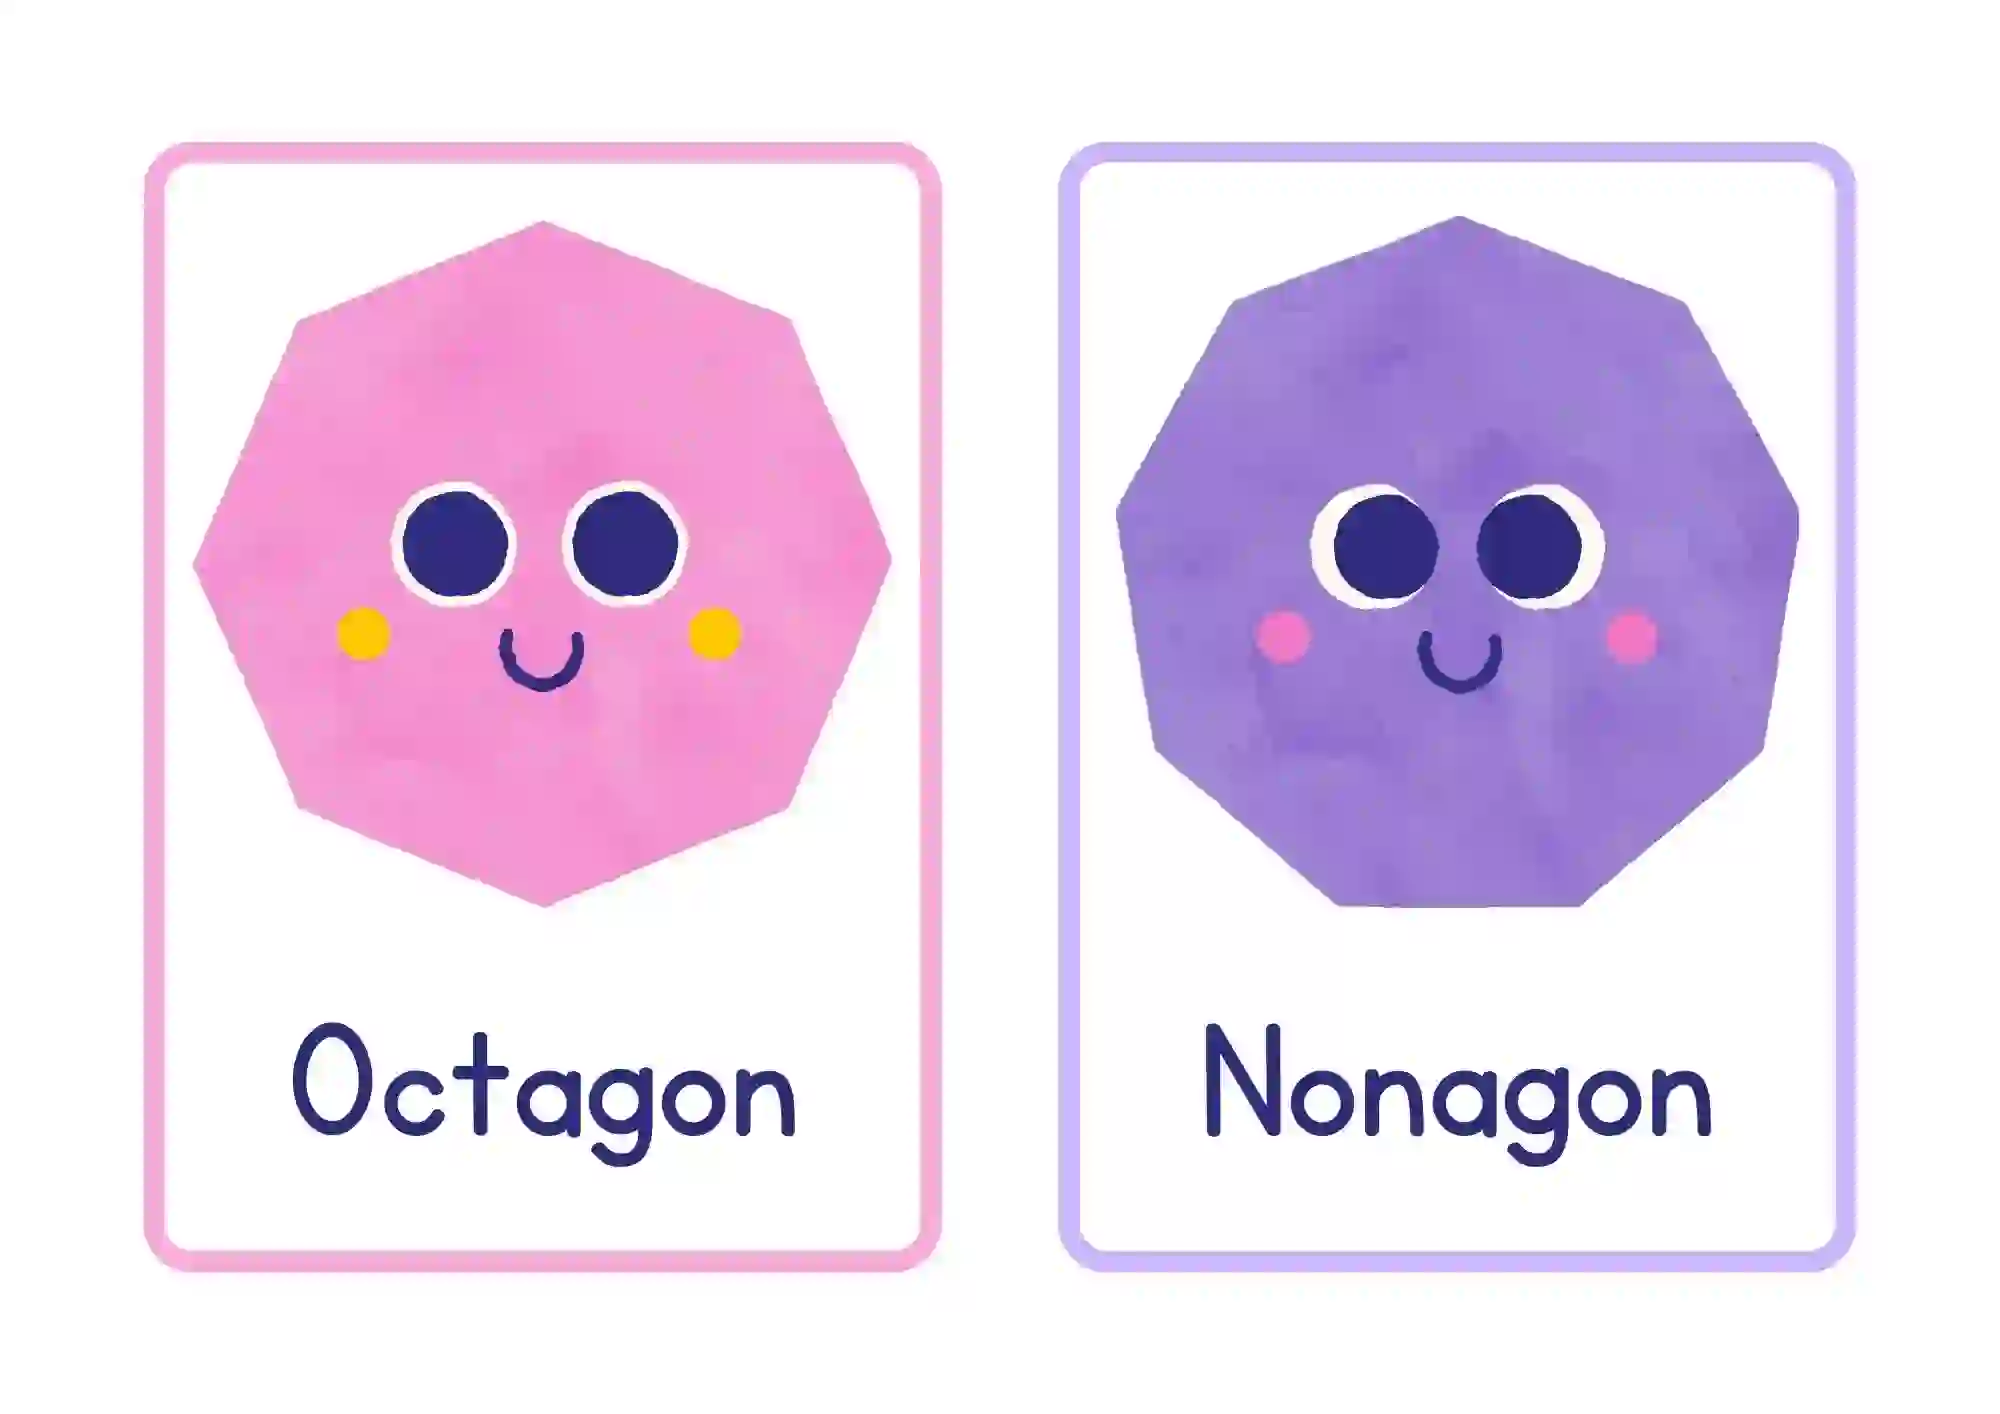 Shape Characters Posters For Kindergarten (octagon and nonagon)